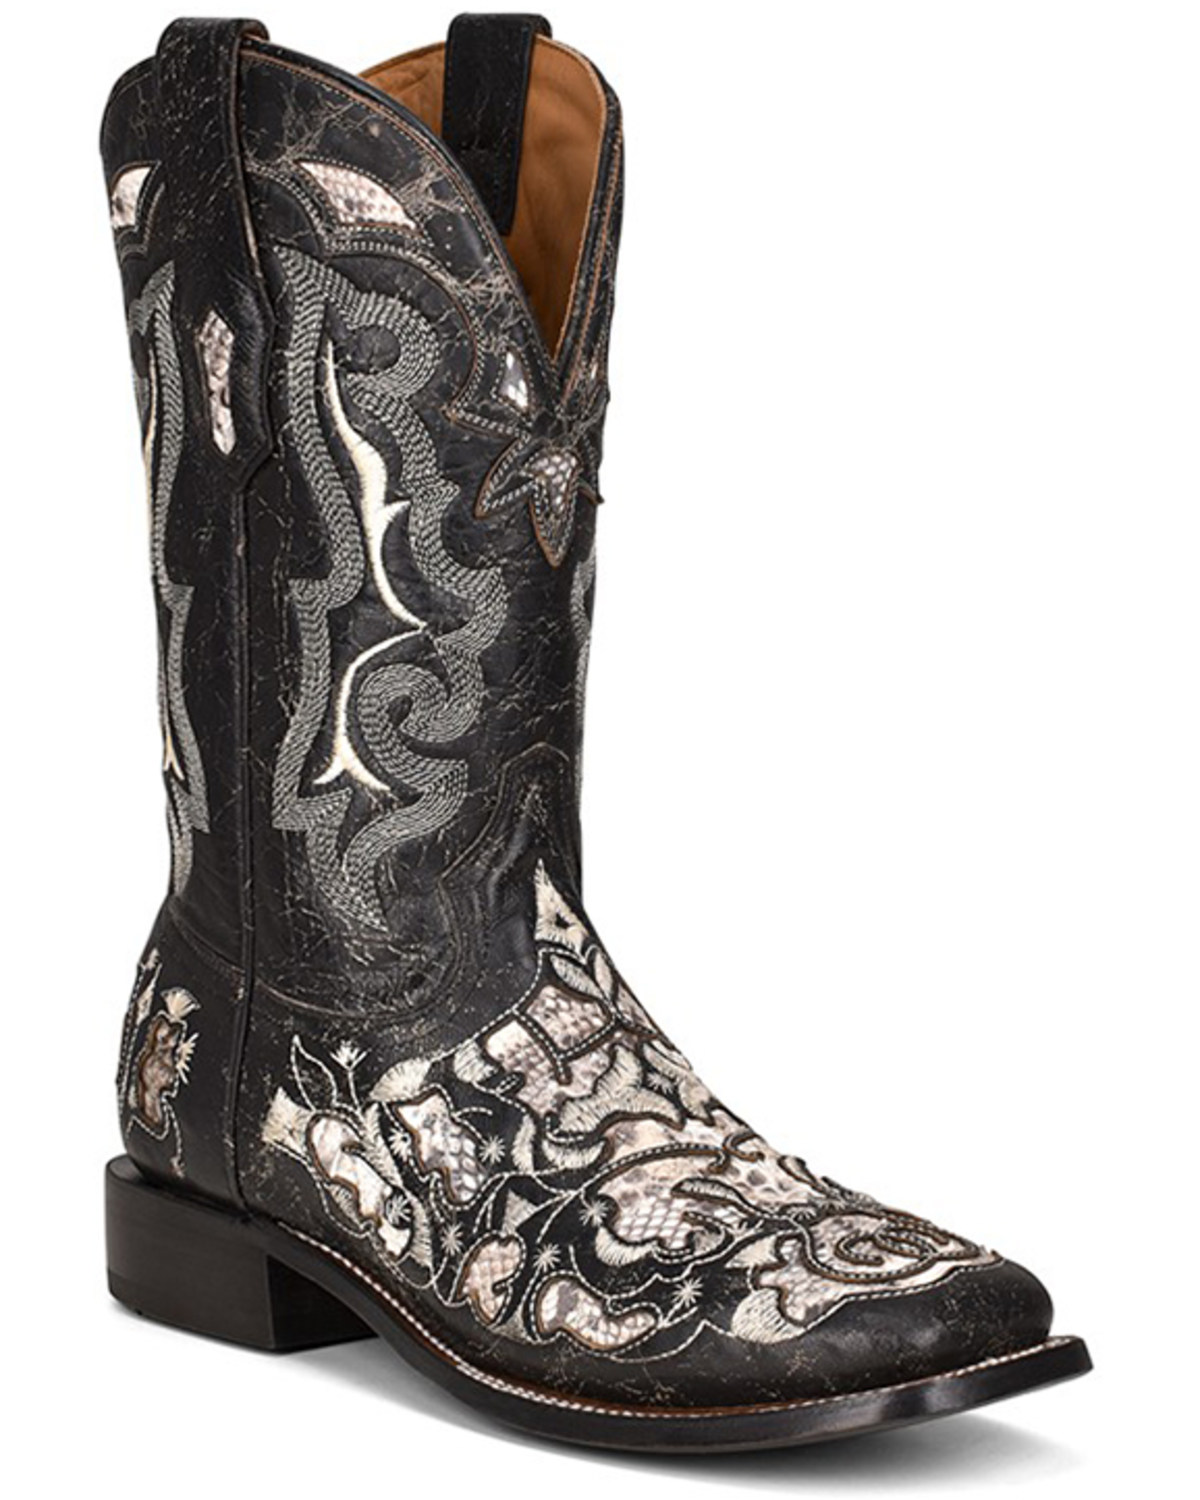 Corral Men's Exotic Python Skin Inlay Western Boots - Square Toe